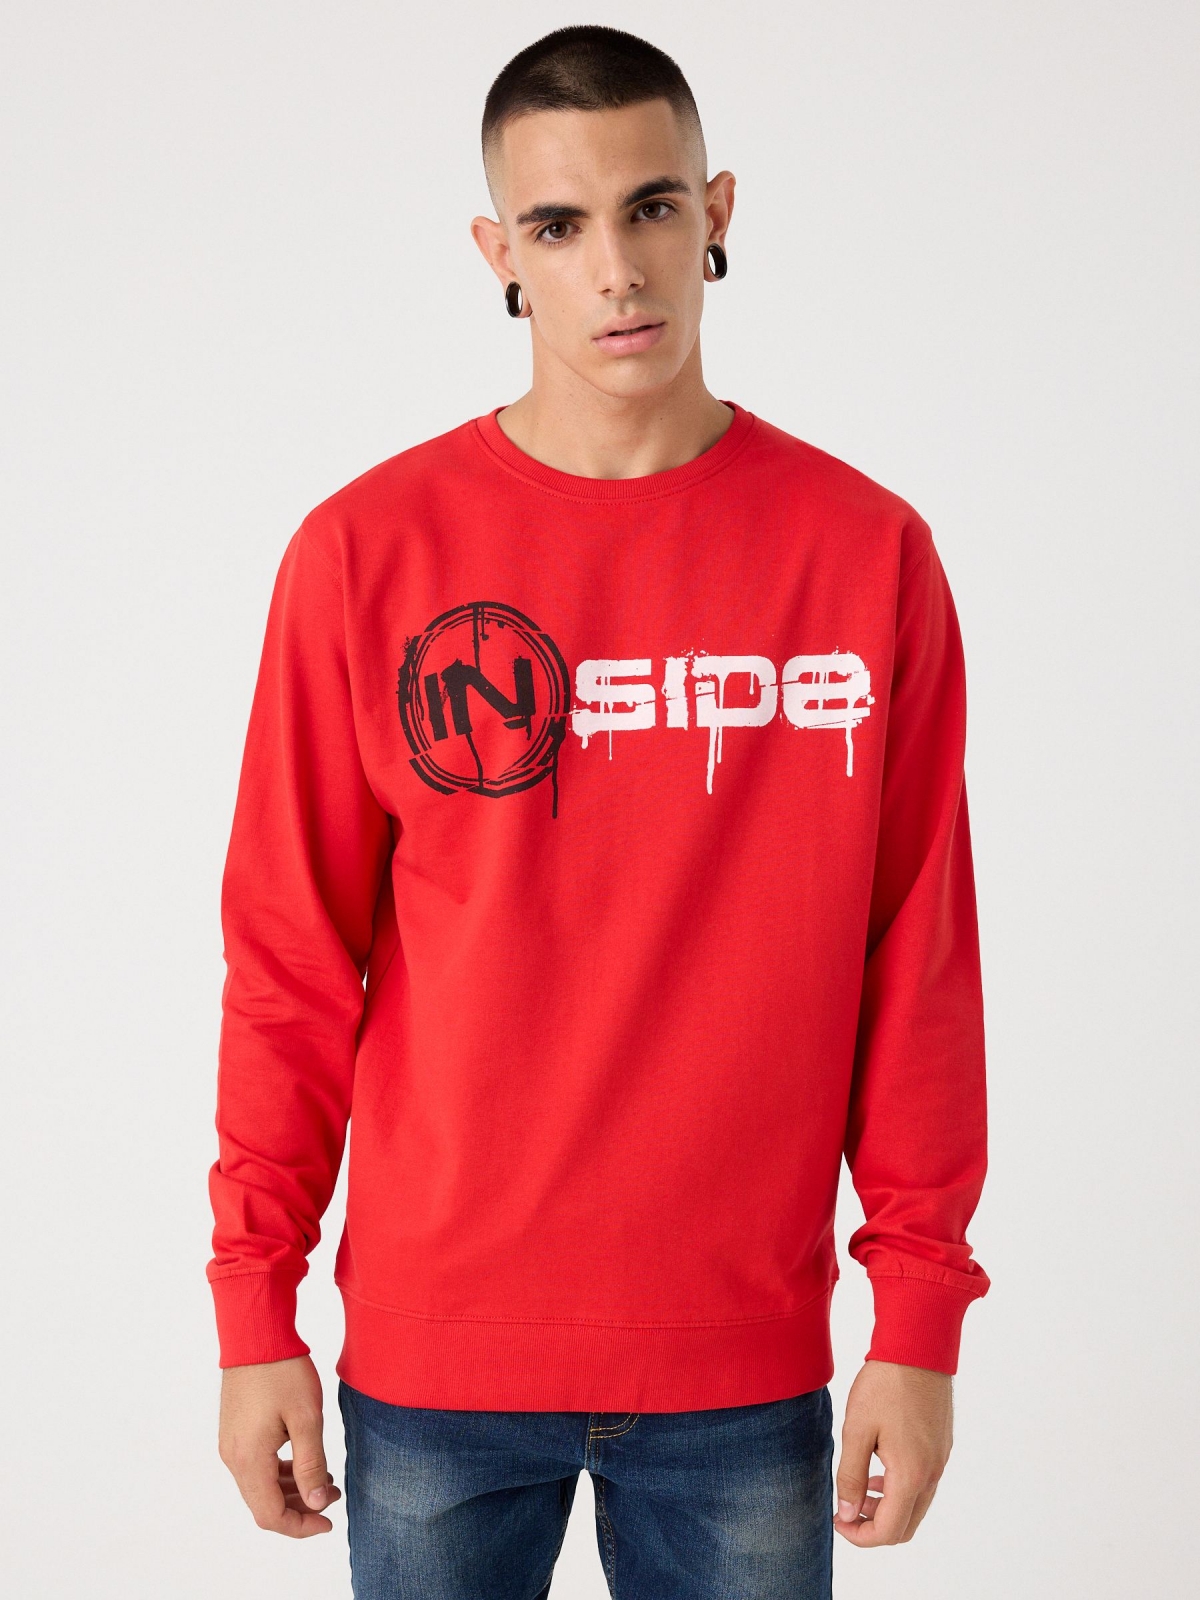 Hoodless sweatshirt with logo red middle front view